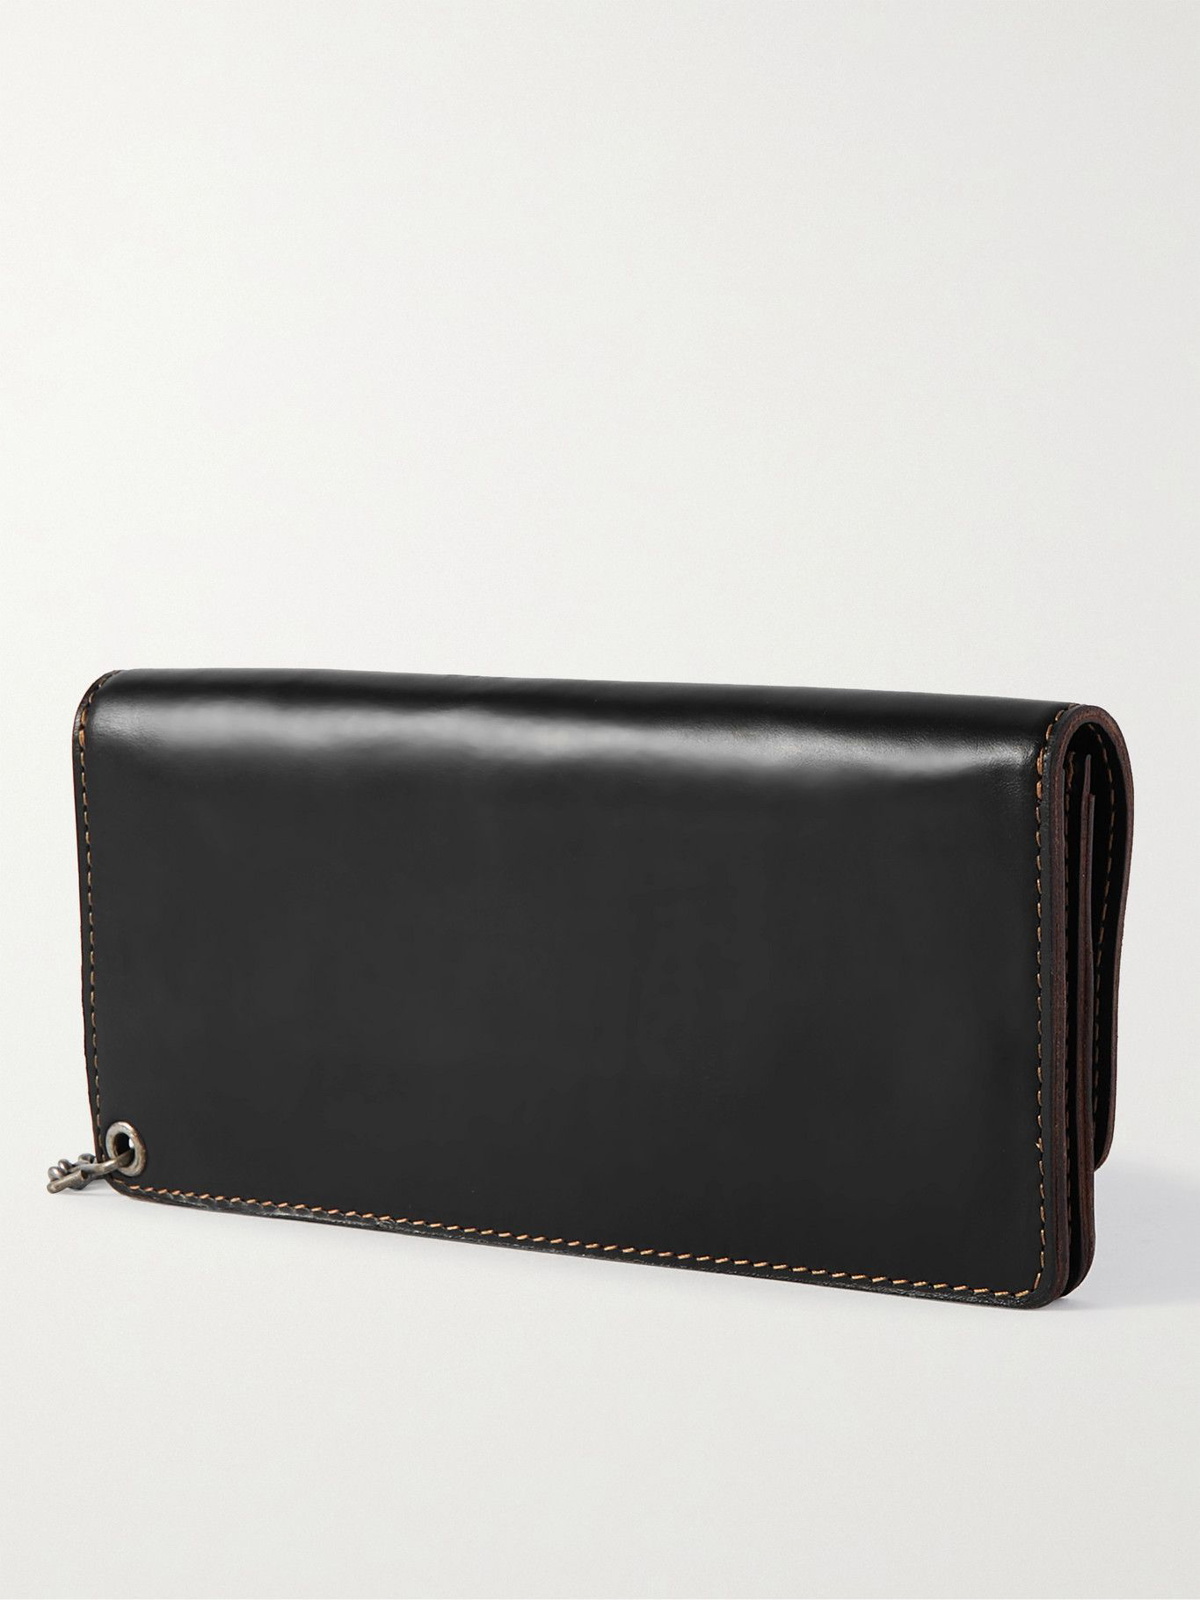 RRL Leather Chain Wallet Black Over Brown